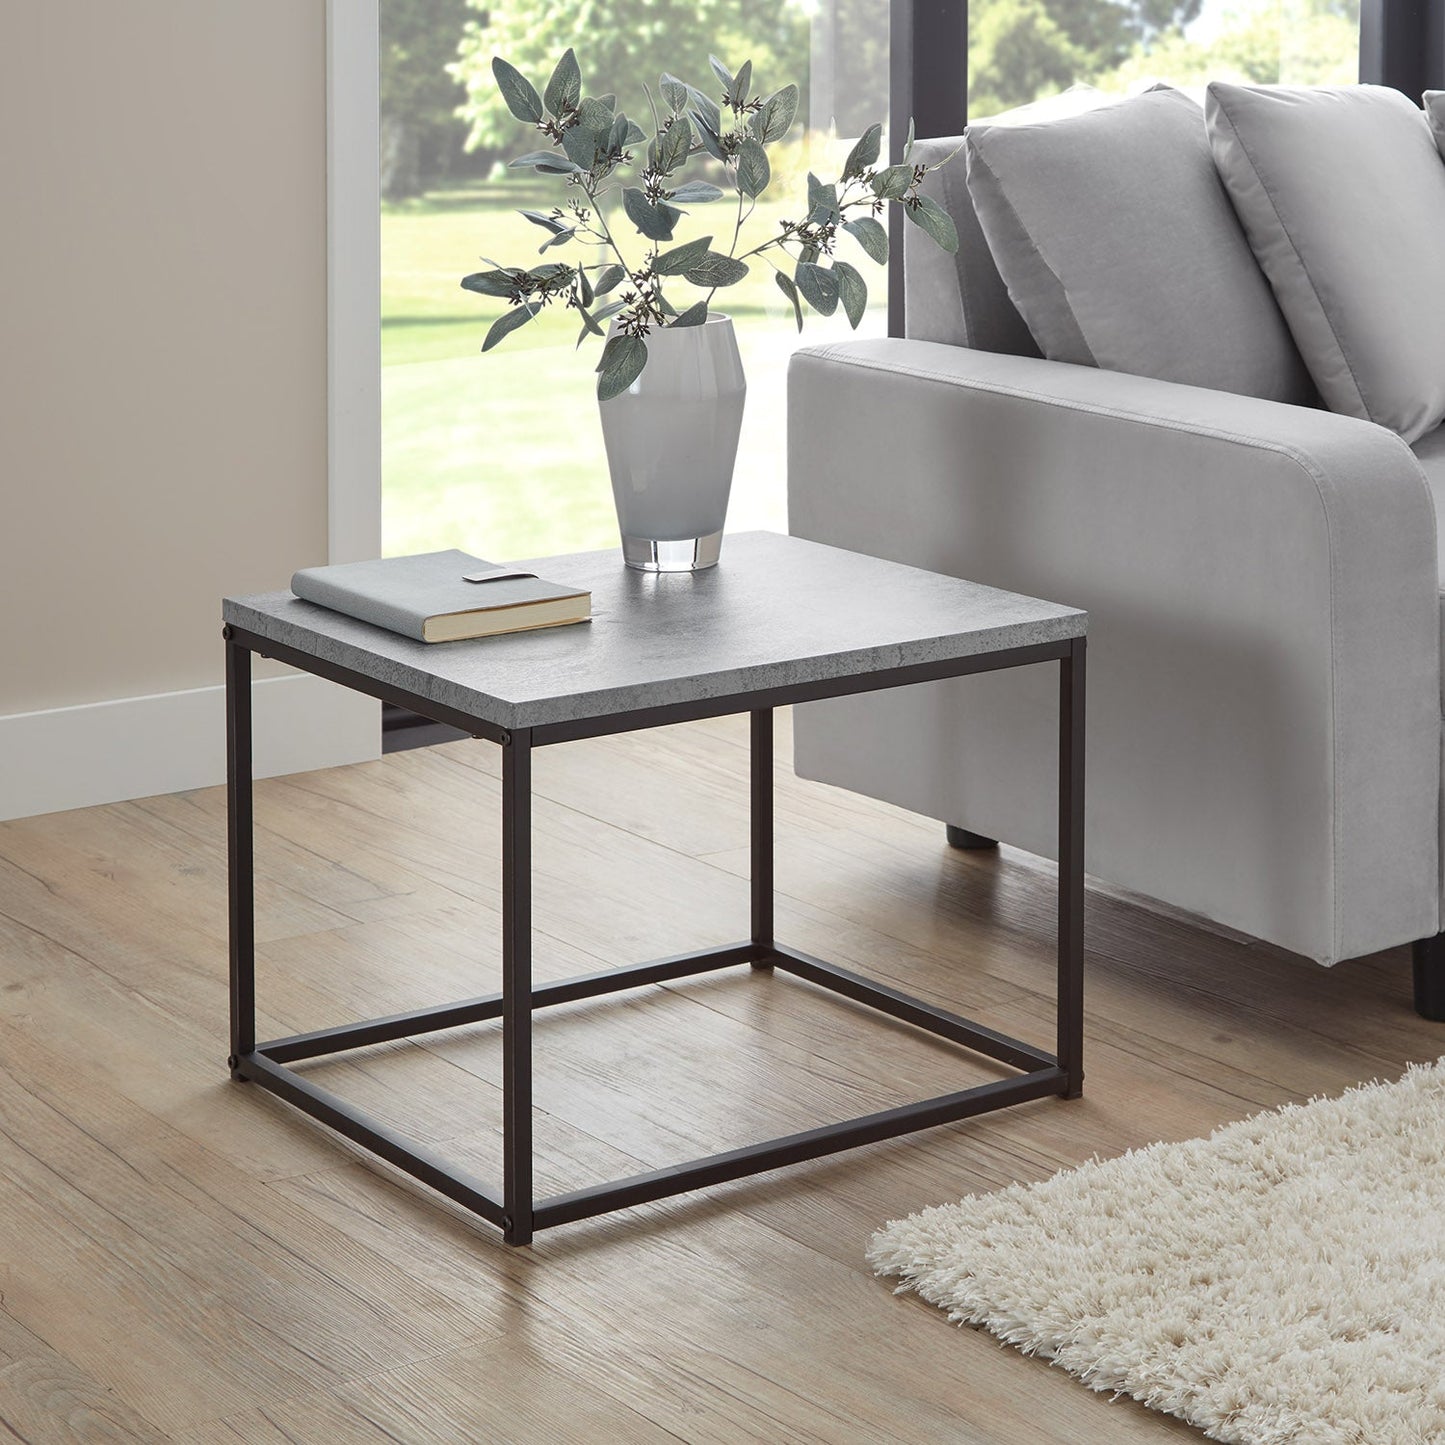 Jay coffee table and side table set - concrete effect and black - Laura James